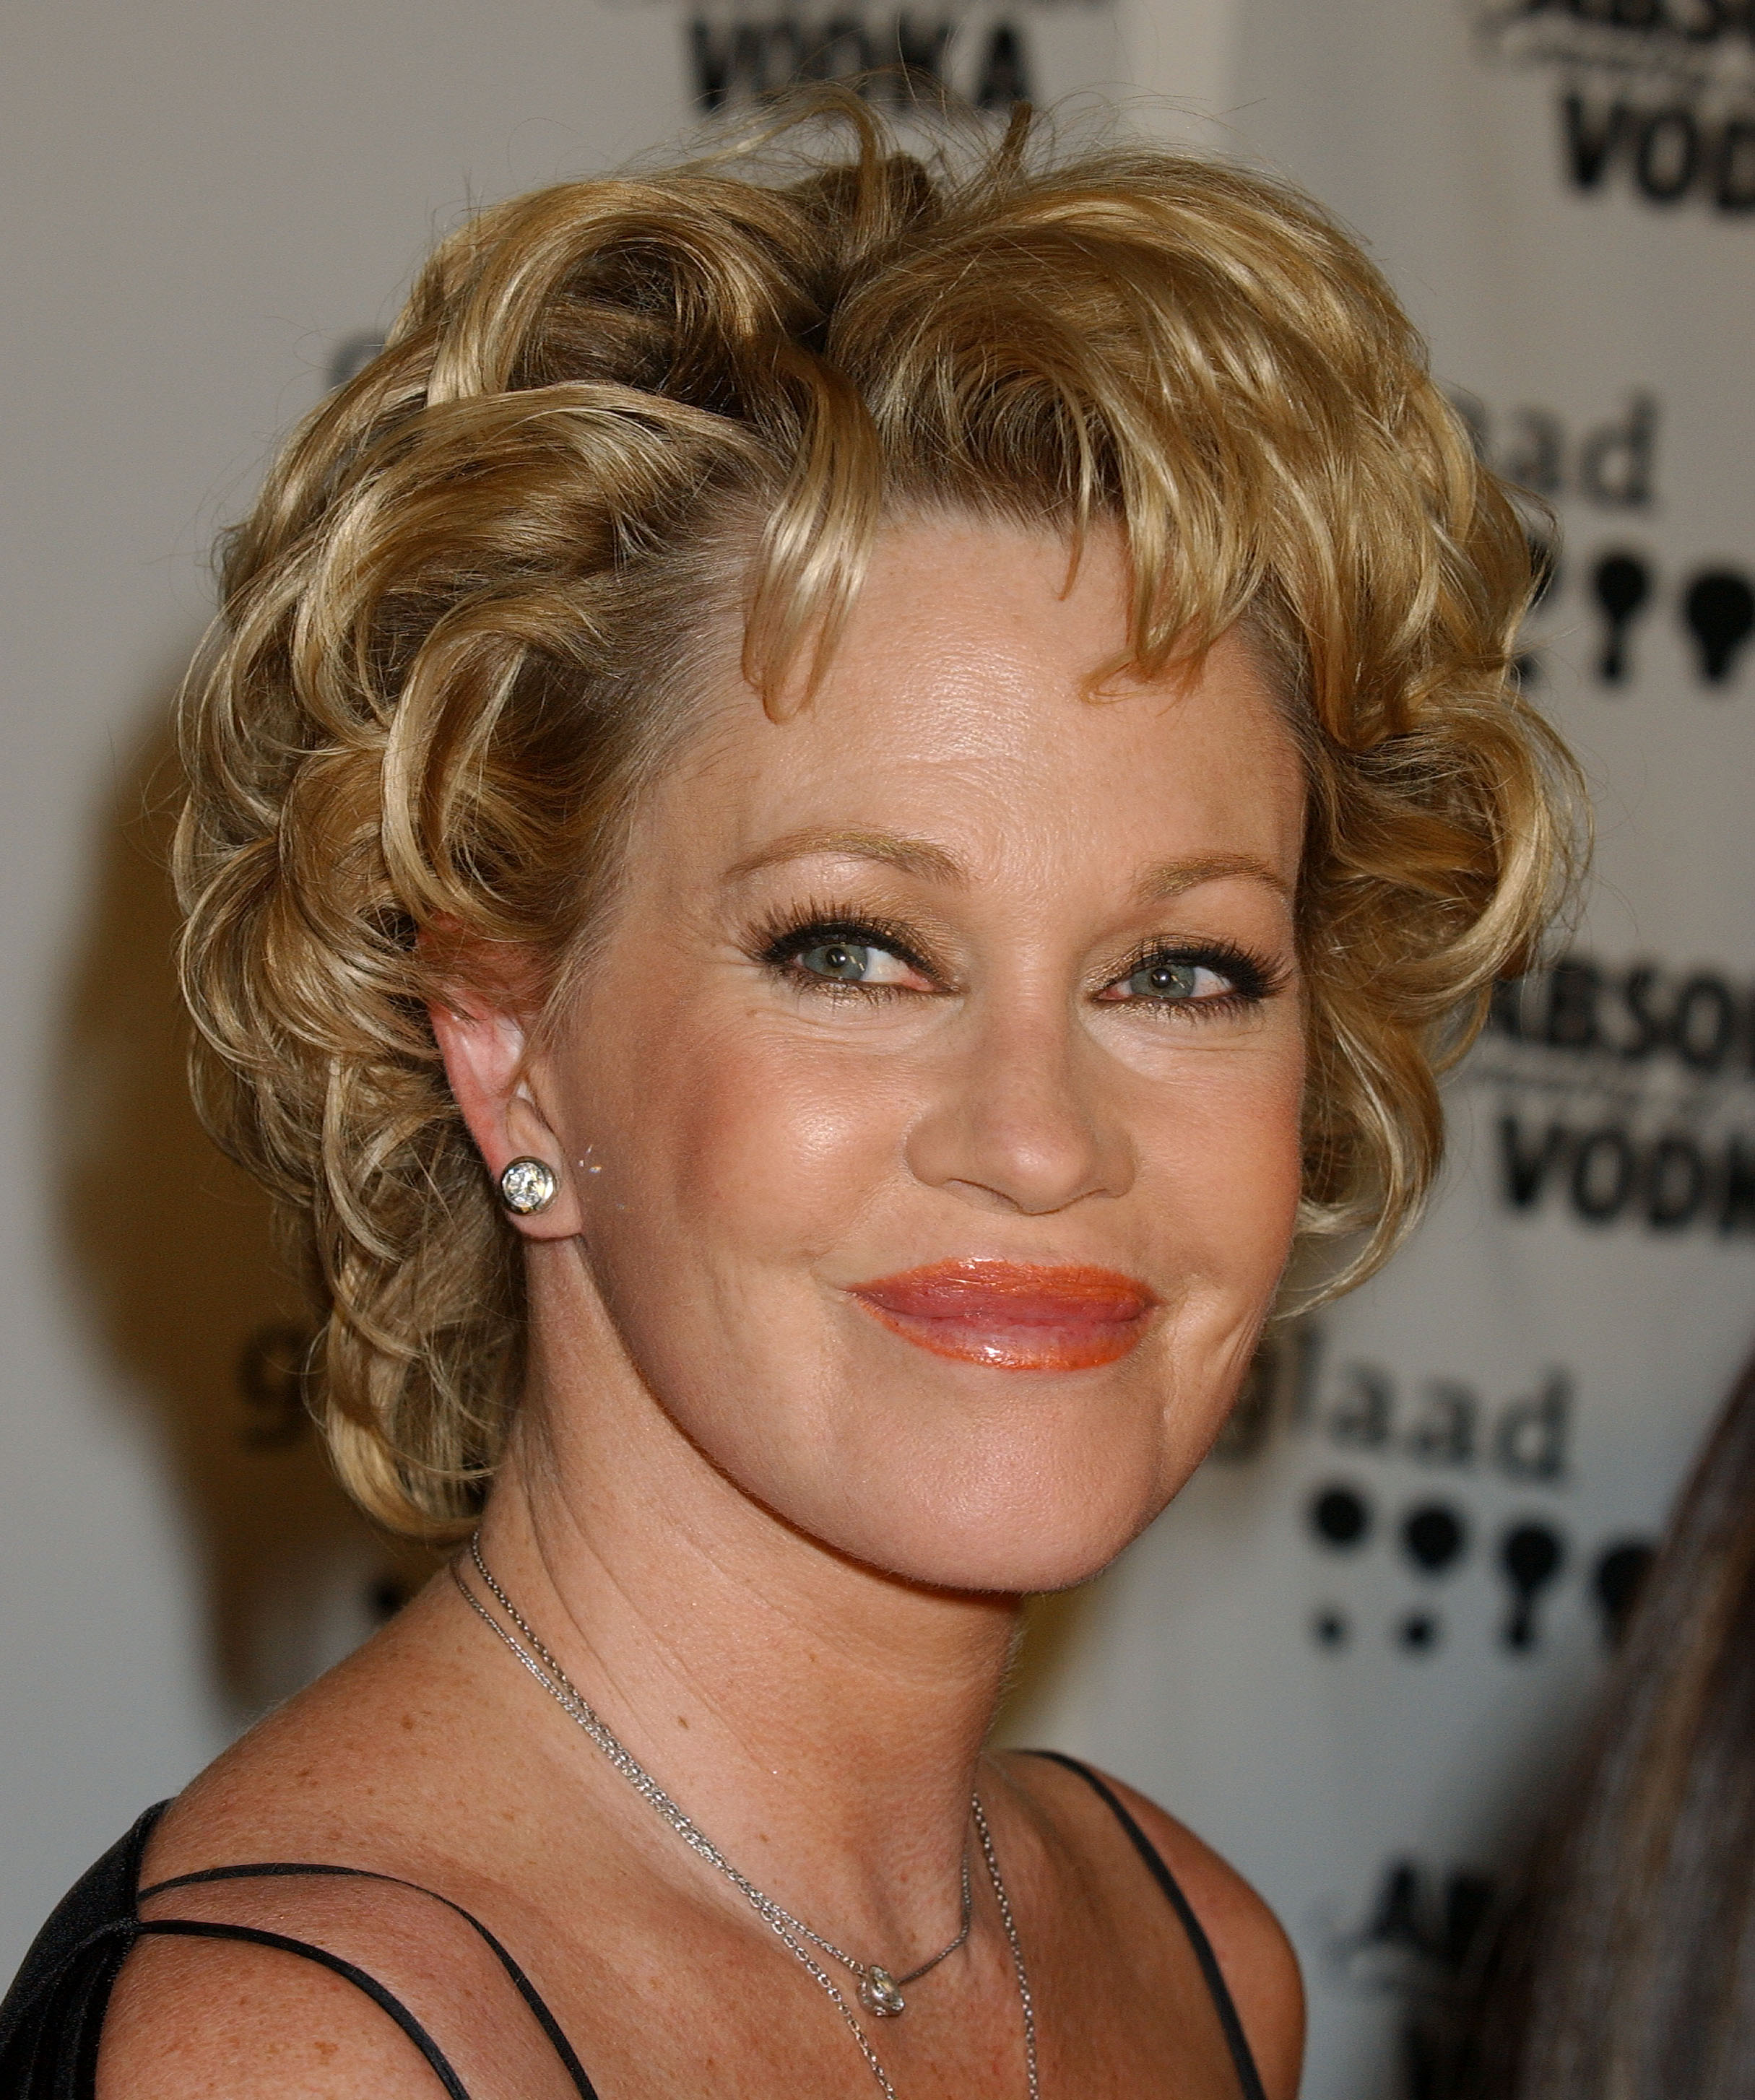 Melanie Griffith during the 15th GLAAD Media Awards Arrivals at Kodak Theatre in Hollywood, California on March 27, 2004 | Source: Getty Images